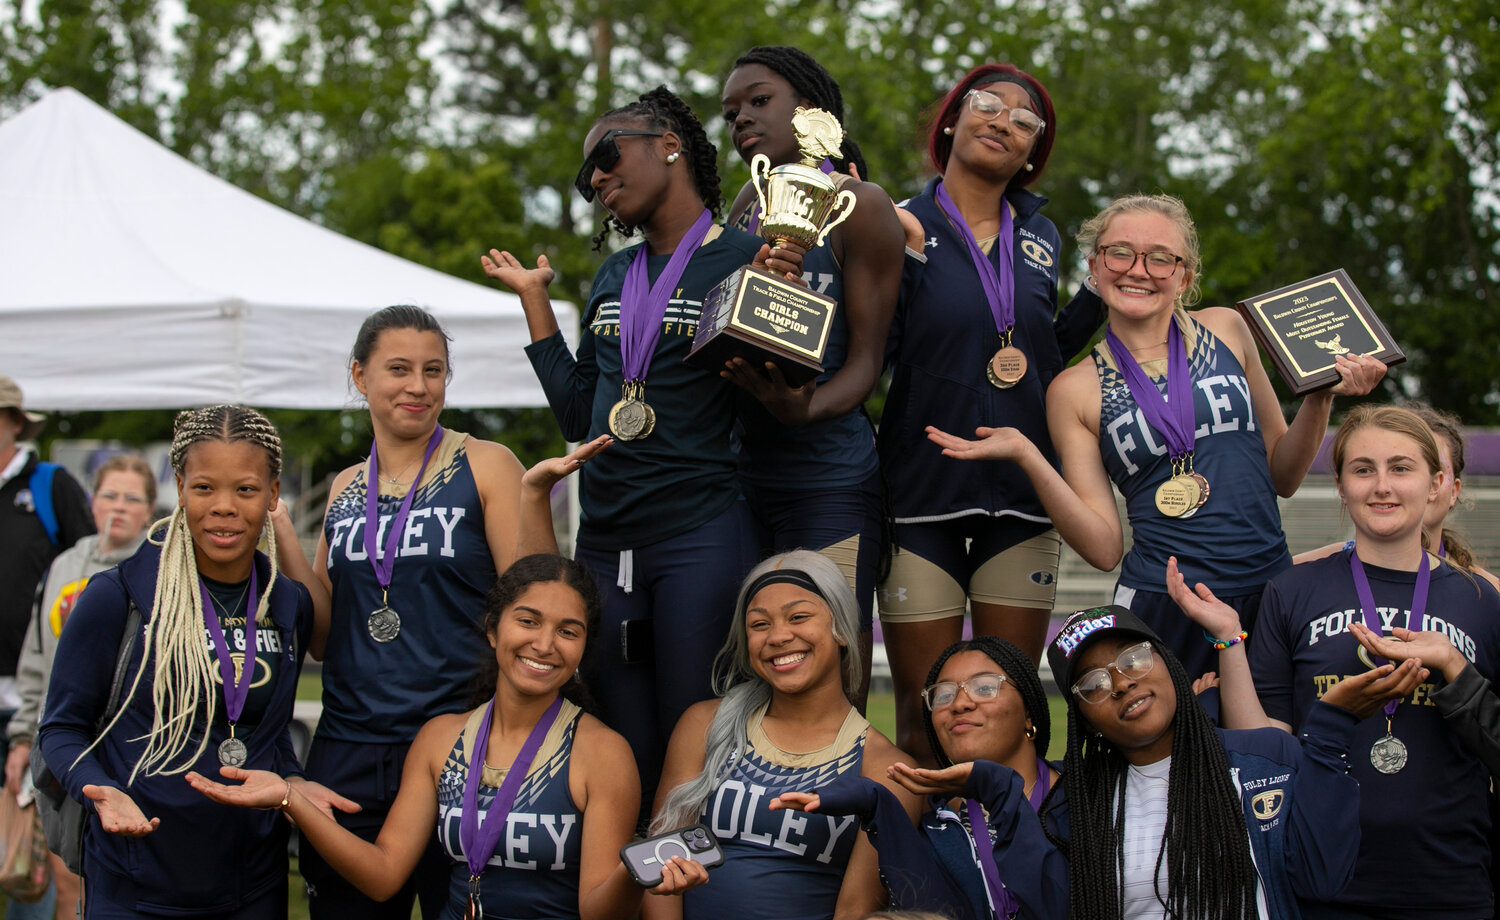 The Foley Lion girls’ track team celebrates their team title at Baldwin County Public Schools track and field championship at Jubilee Stadium in Daphne Tuesday, April 18. The squad earned 21 podium finishes with top-three spots as well as the most outstanding female performer in junior Hope Collins.